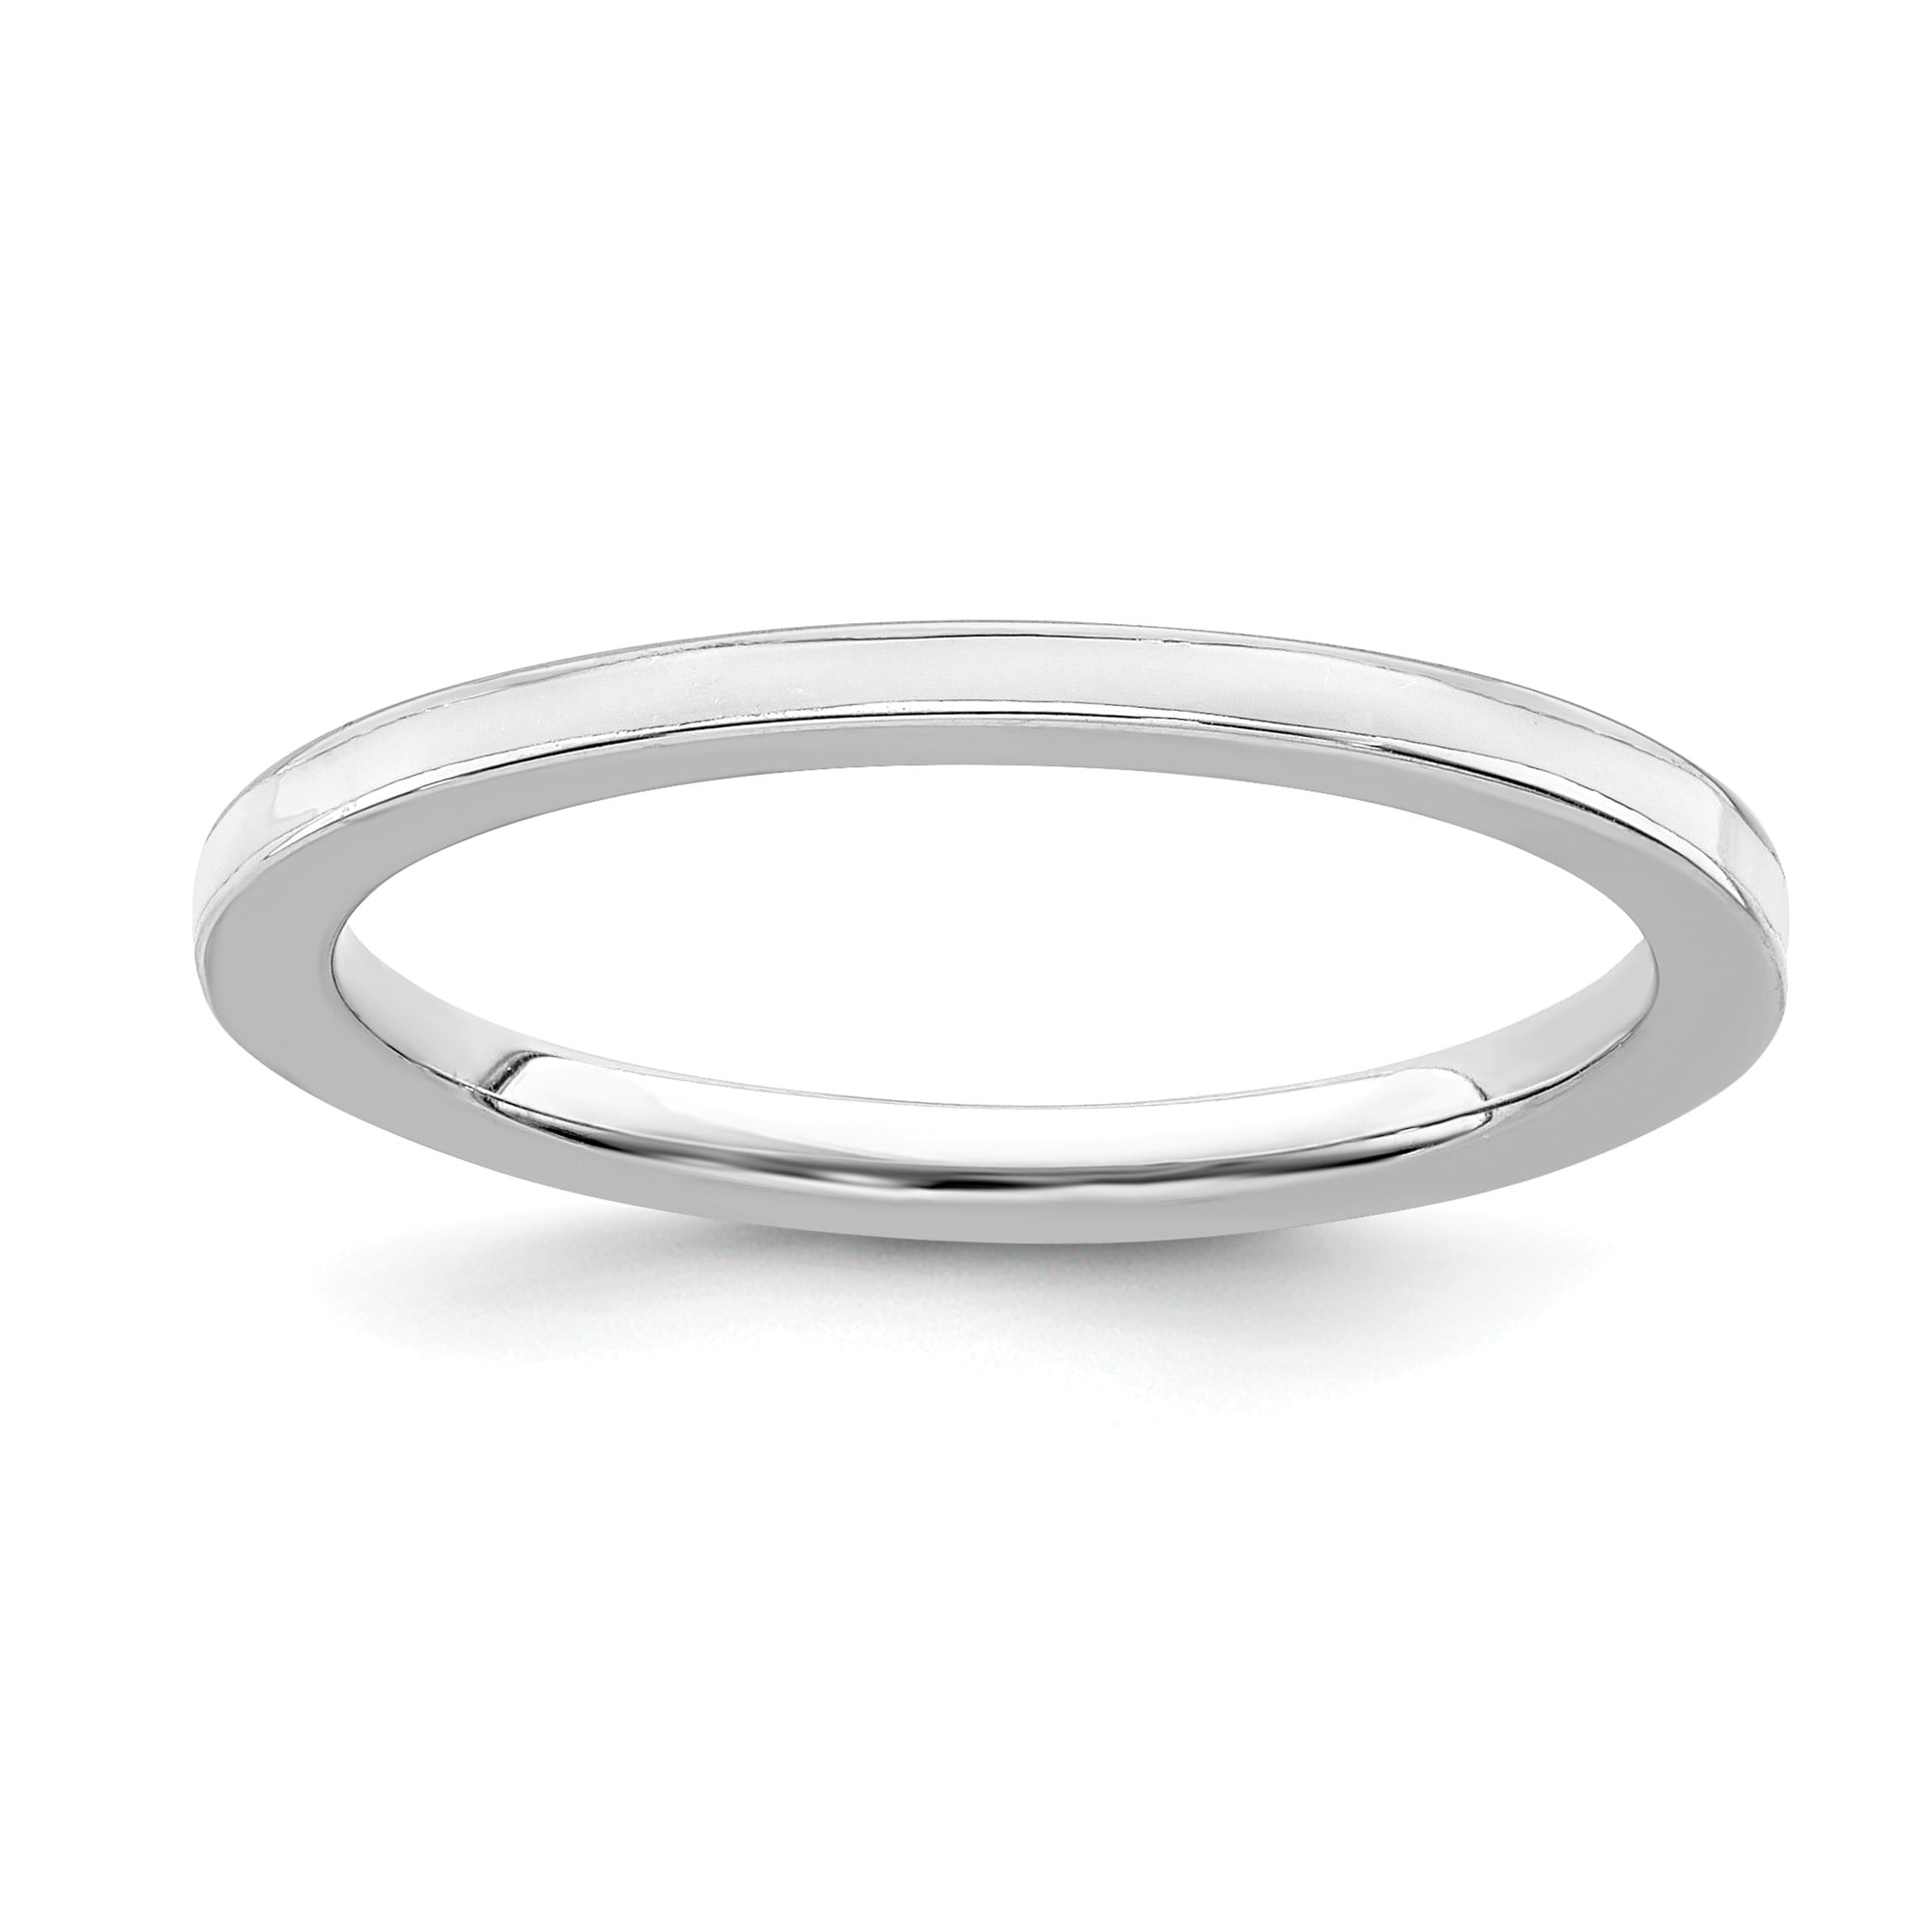 Bonyak Jewelry Sterling Silver Band for 10 mm Cushion Ring Size 7